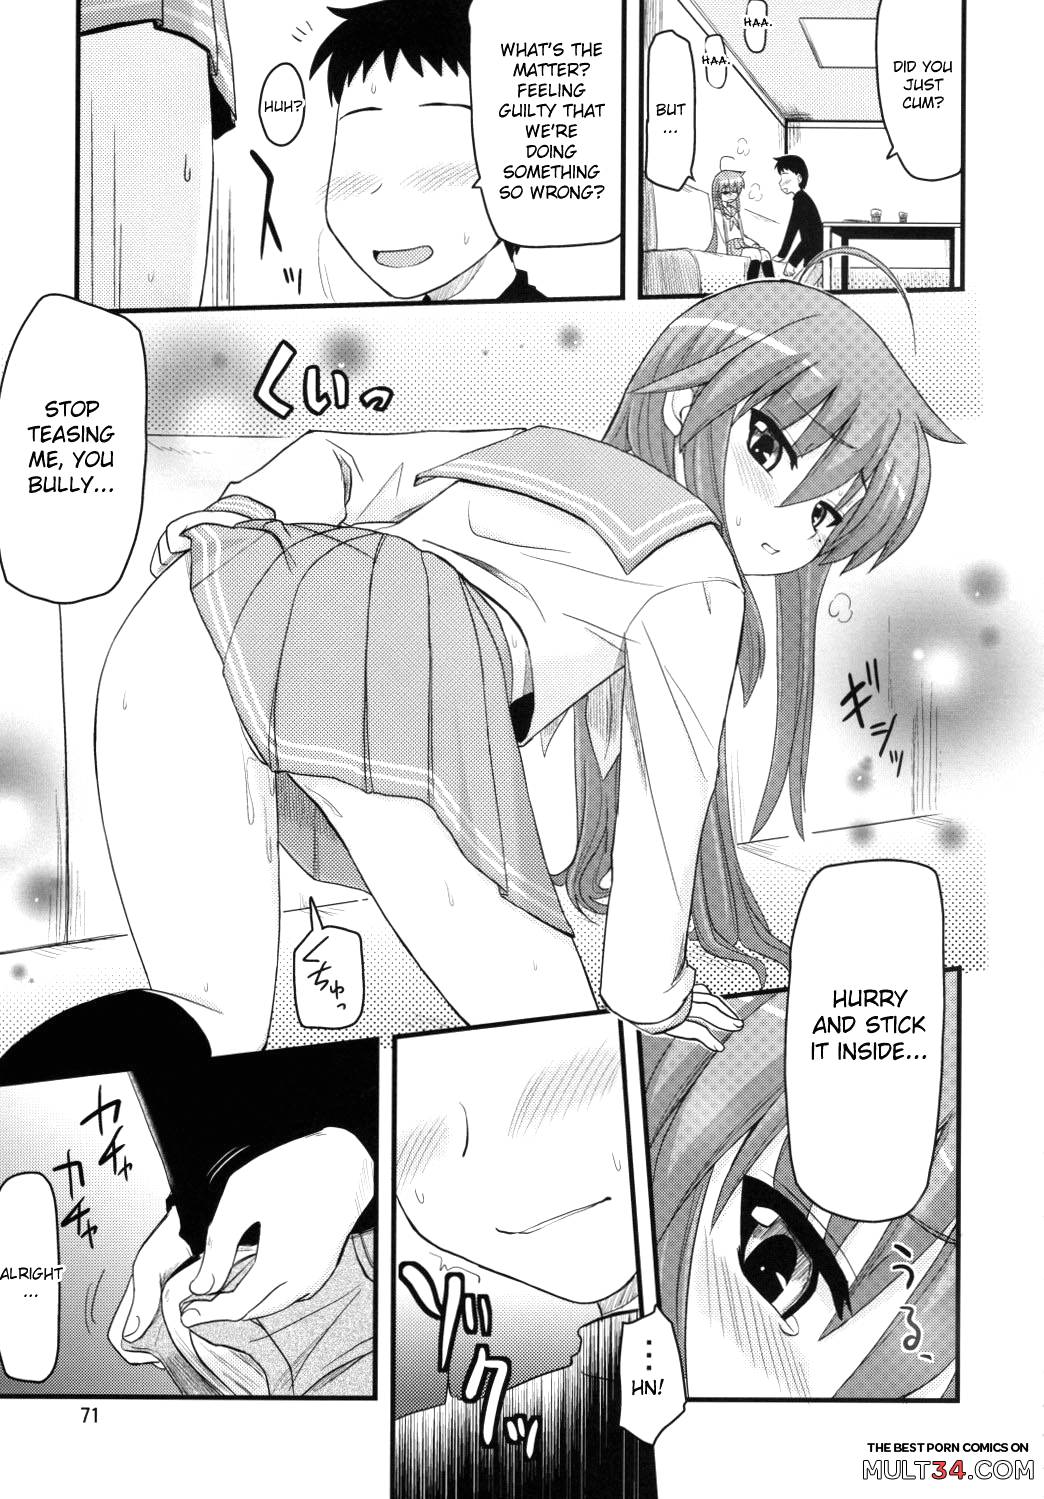 Konata and Oh-zu 4 people each and every one + 1 page 67